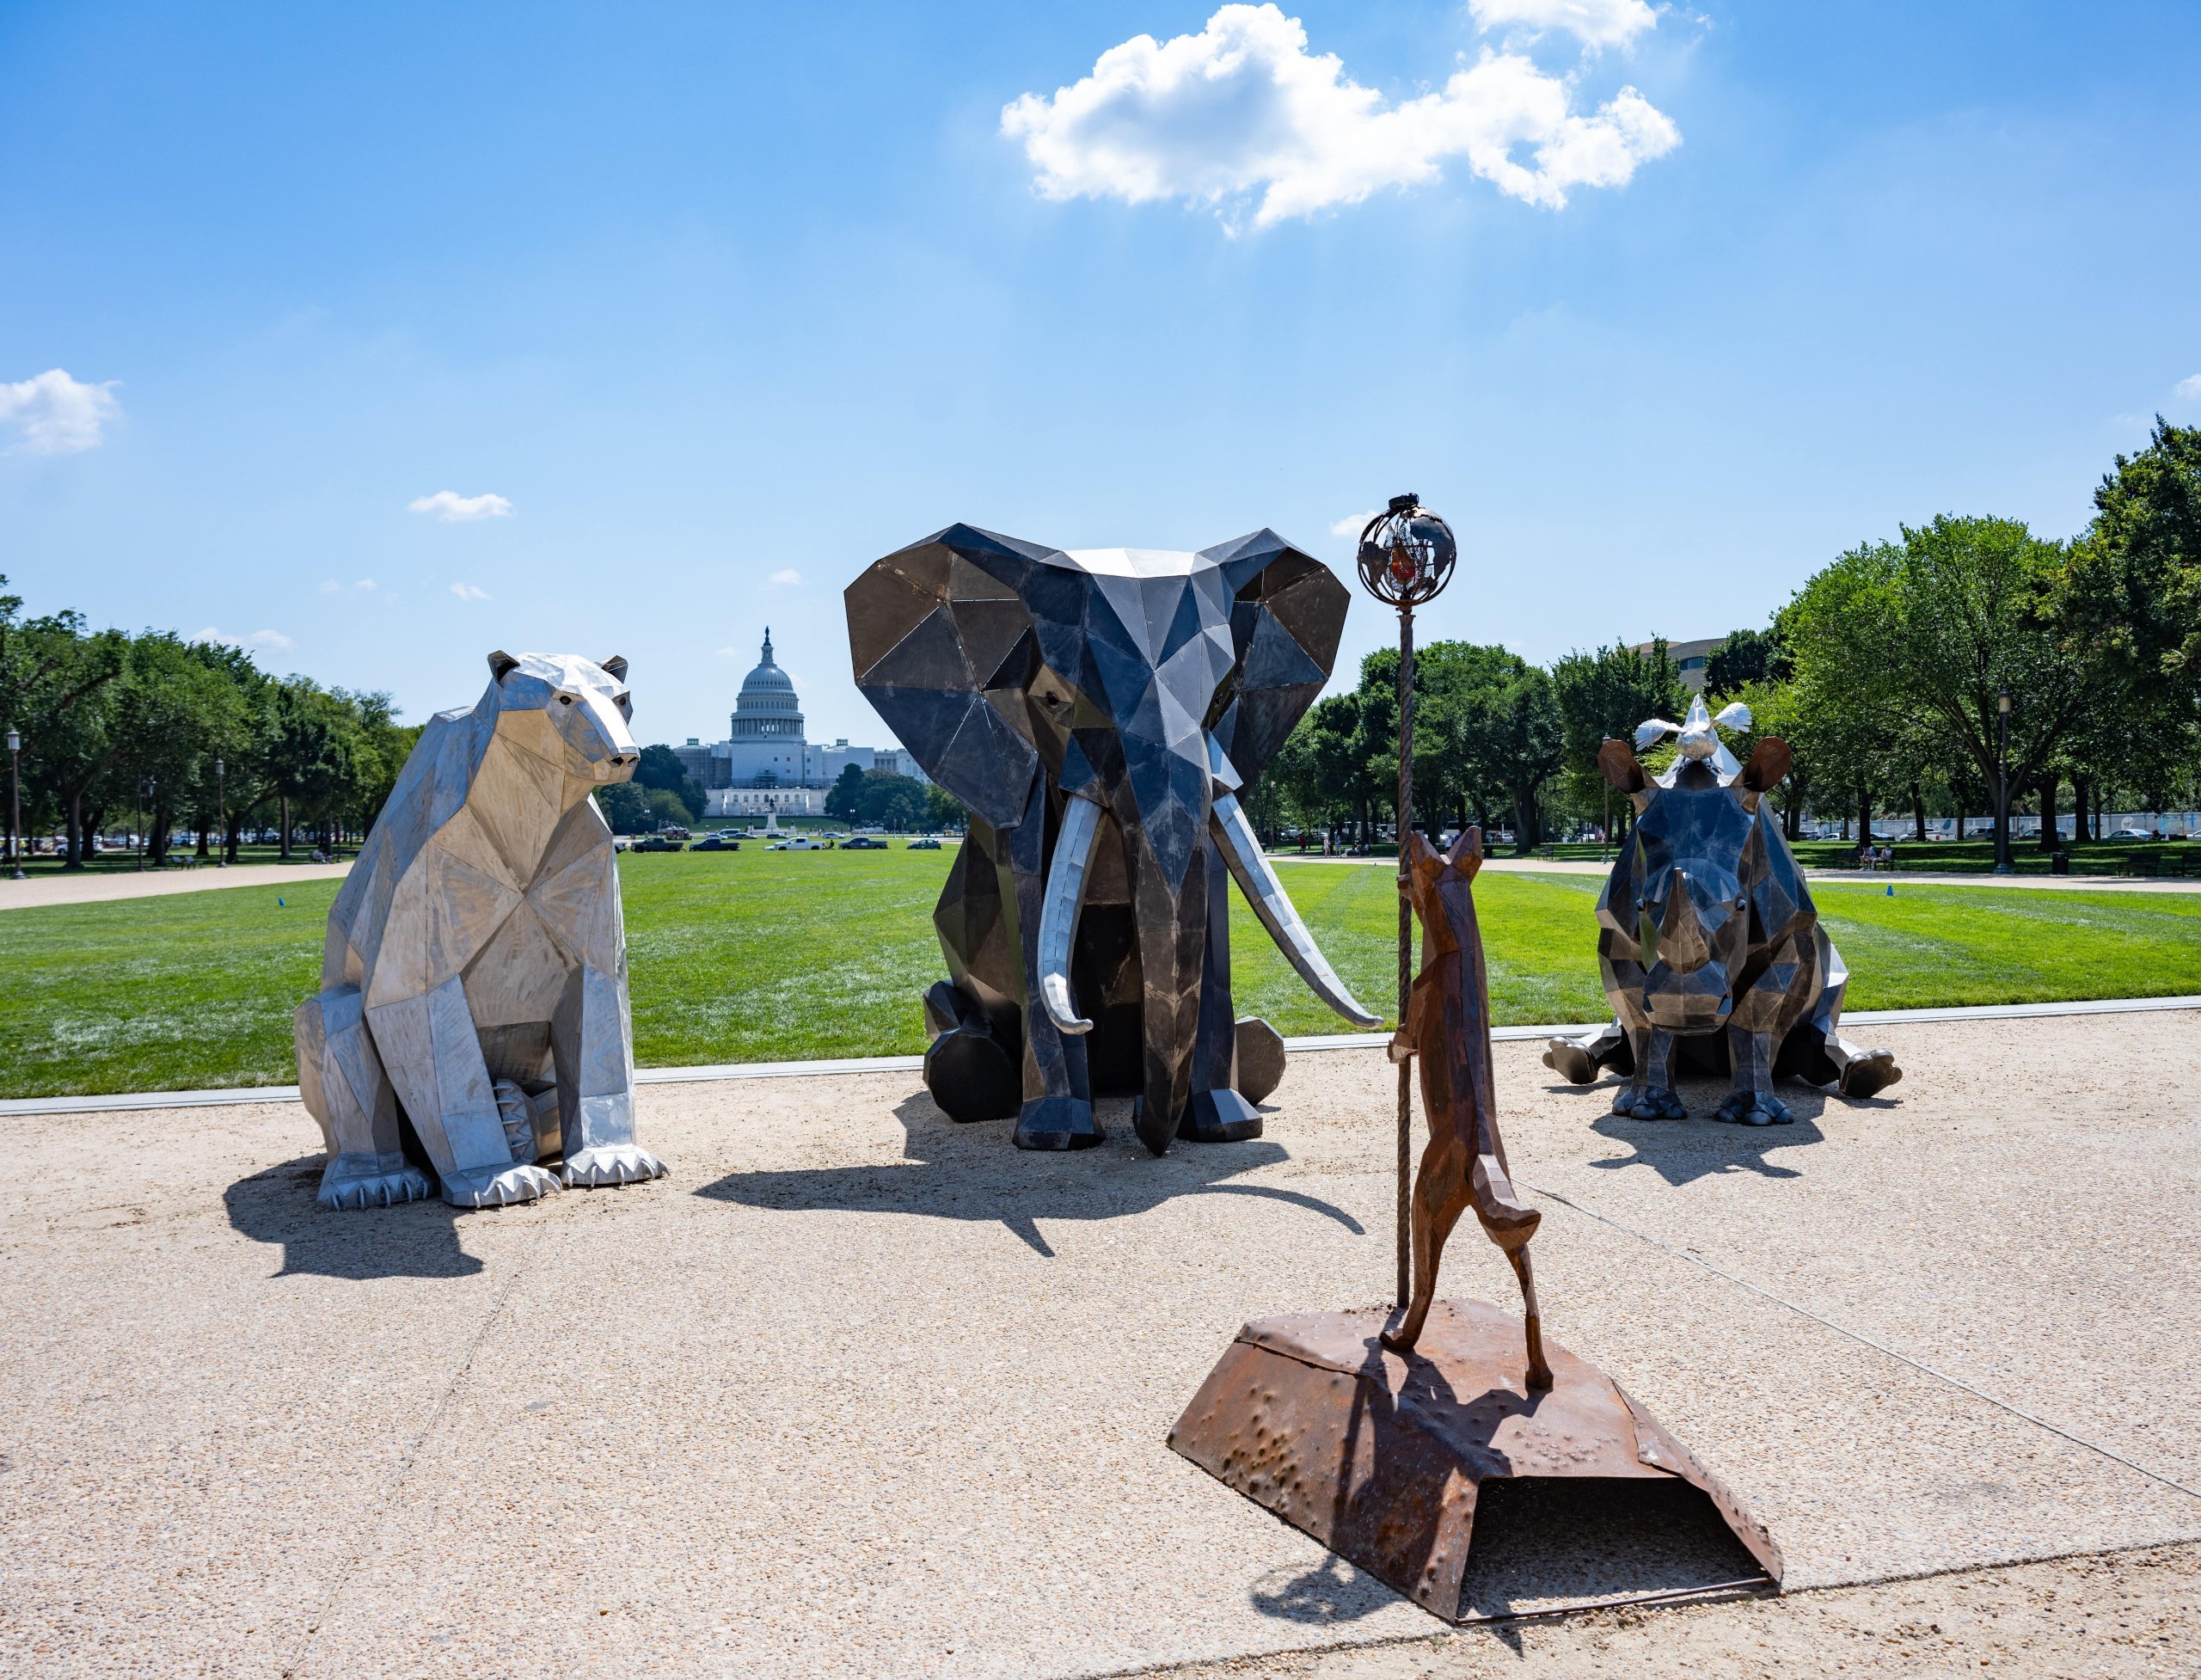 animal sculpture in DC showing angular metal animal sculptures with a backdrop of the US Capitol building. from left to right: polar bear, elephant, rhinoceros with a bird on their back, and at a podium with a microphone appearing to dictate to the three, a meerkat.